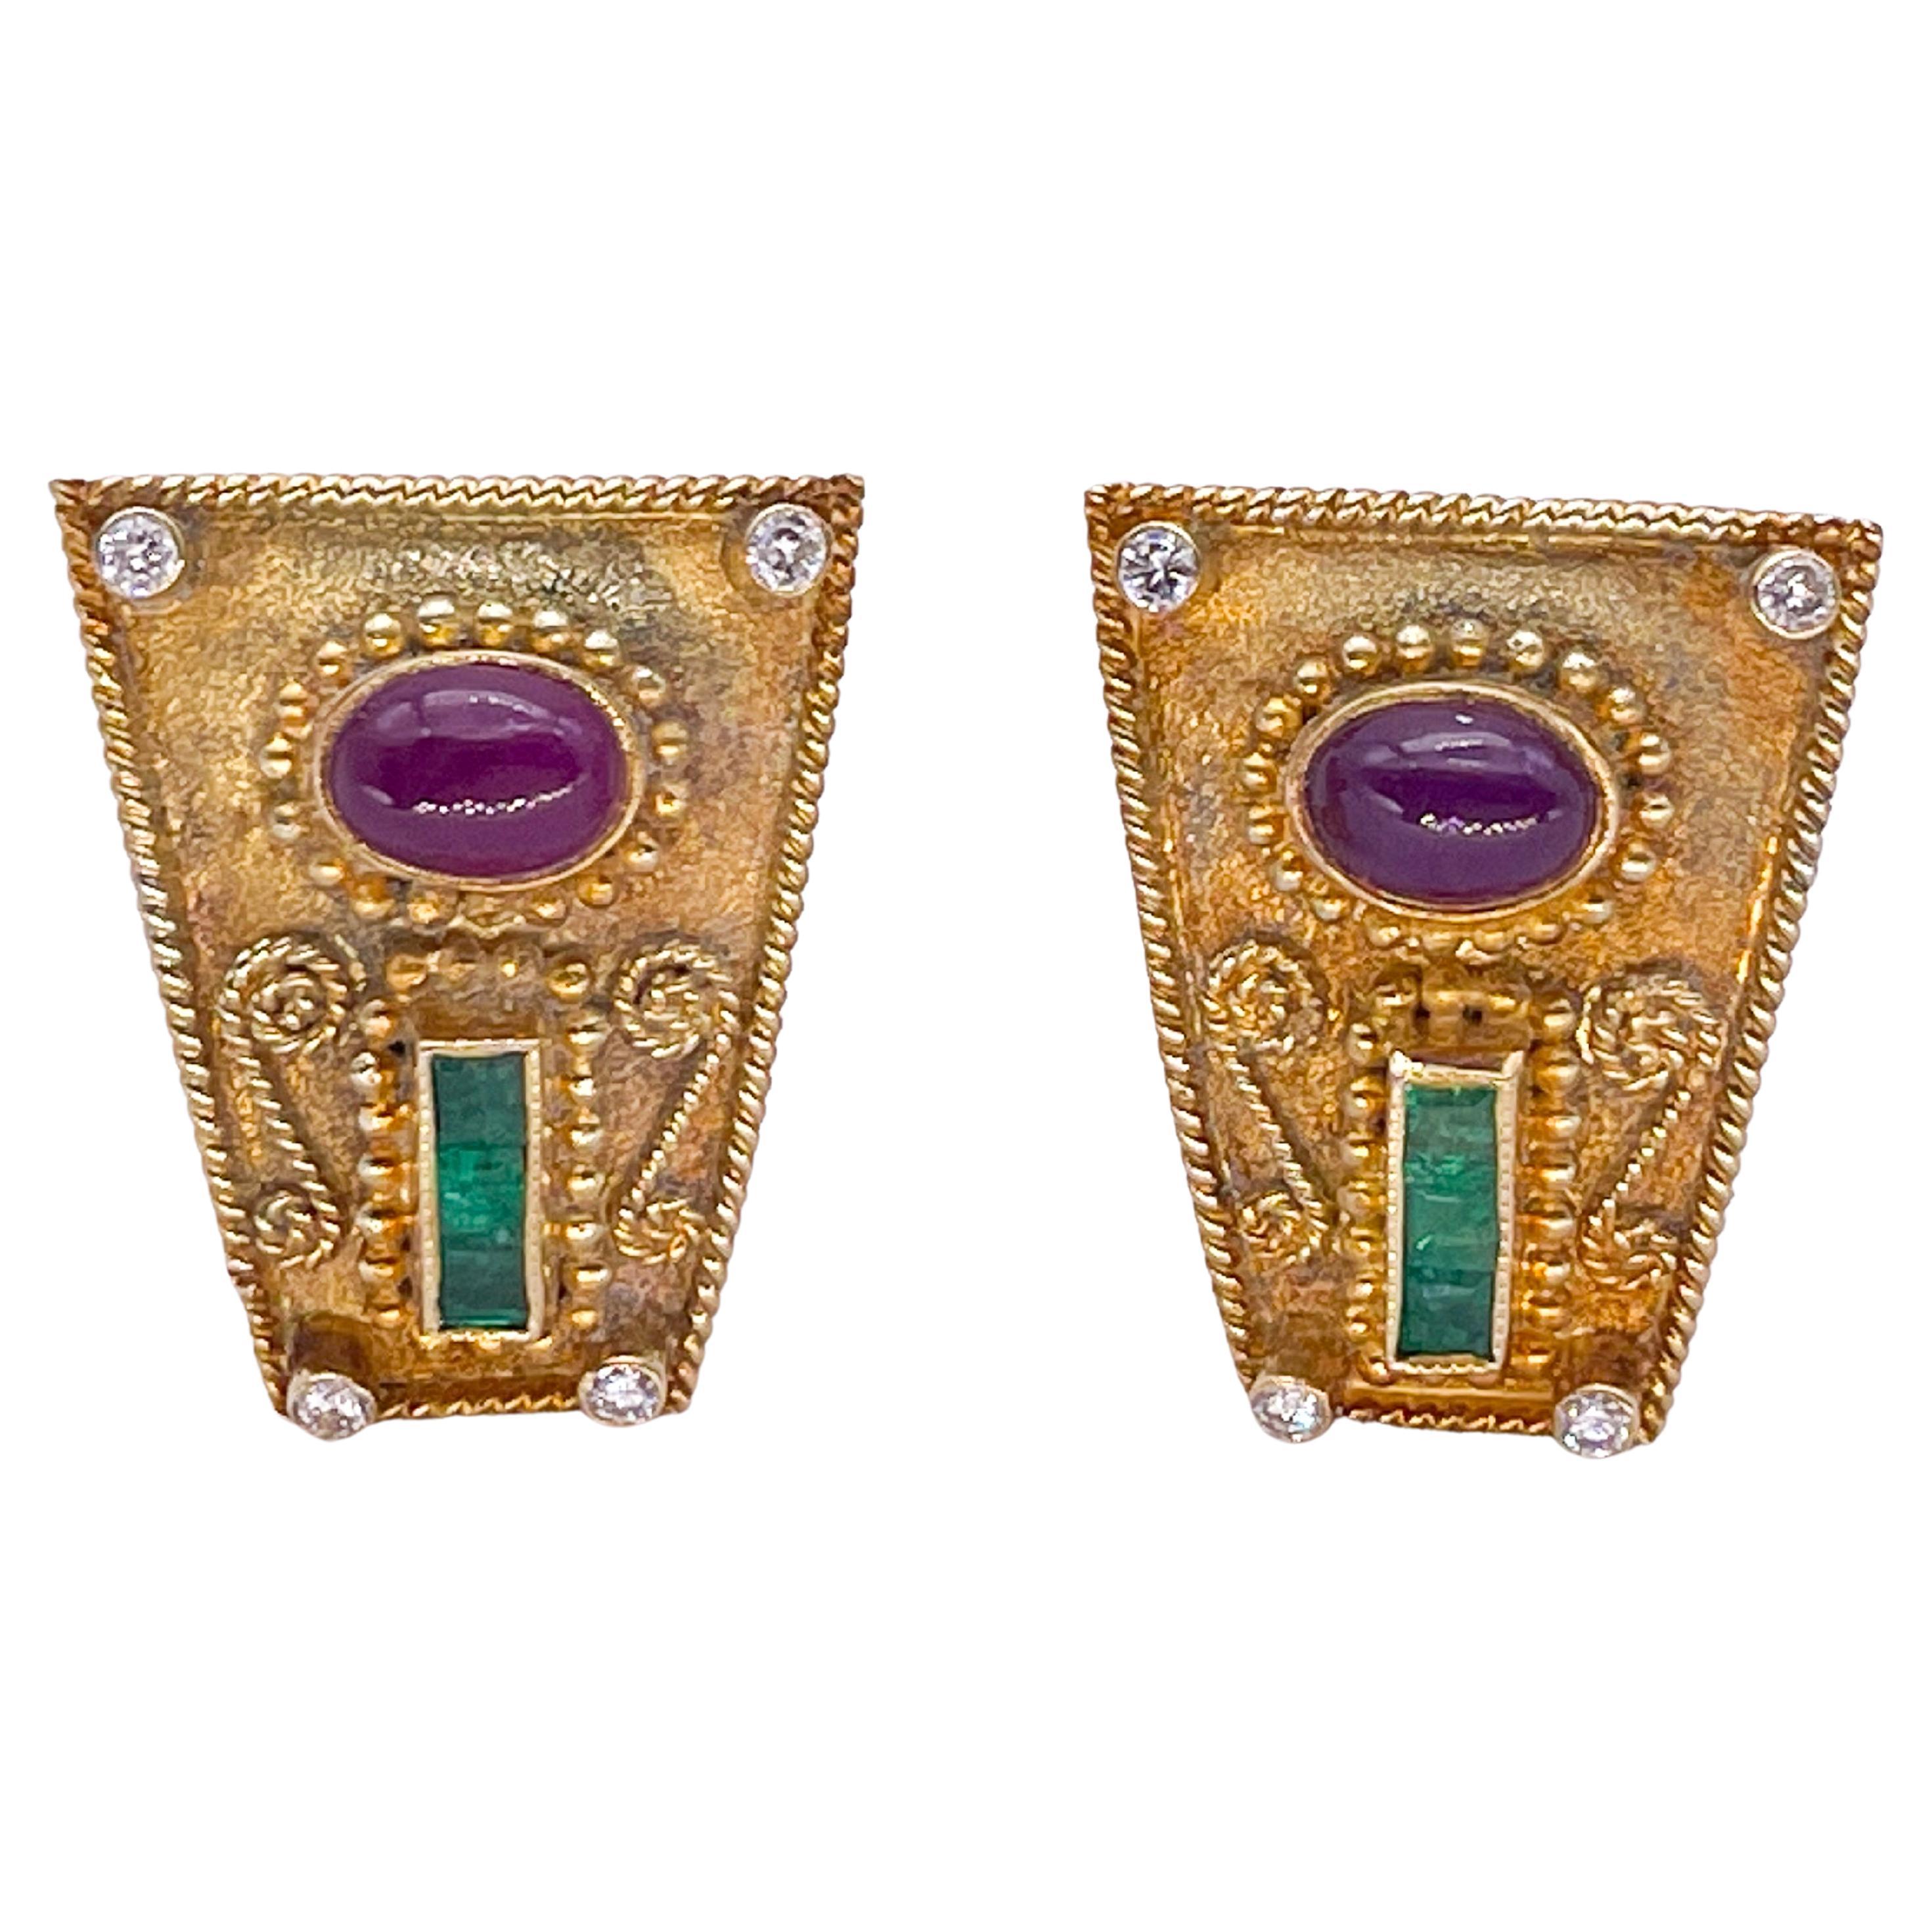 Gikas 18k Gold Earrings with Ruby, Emerald and Diamond Stones For Sale